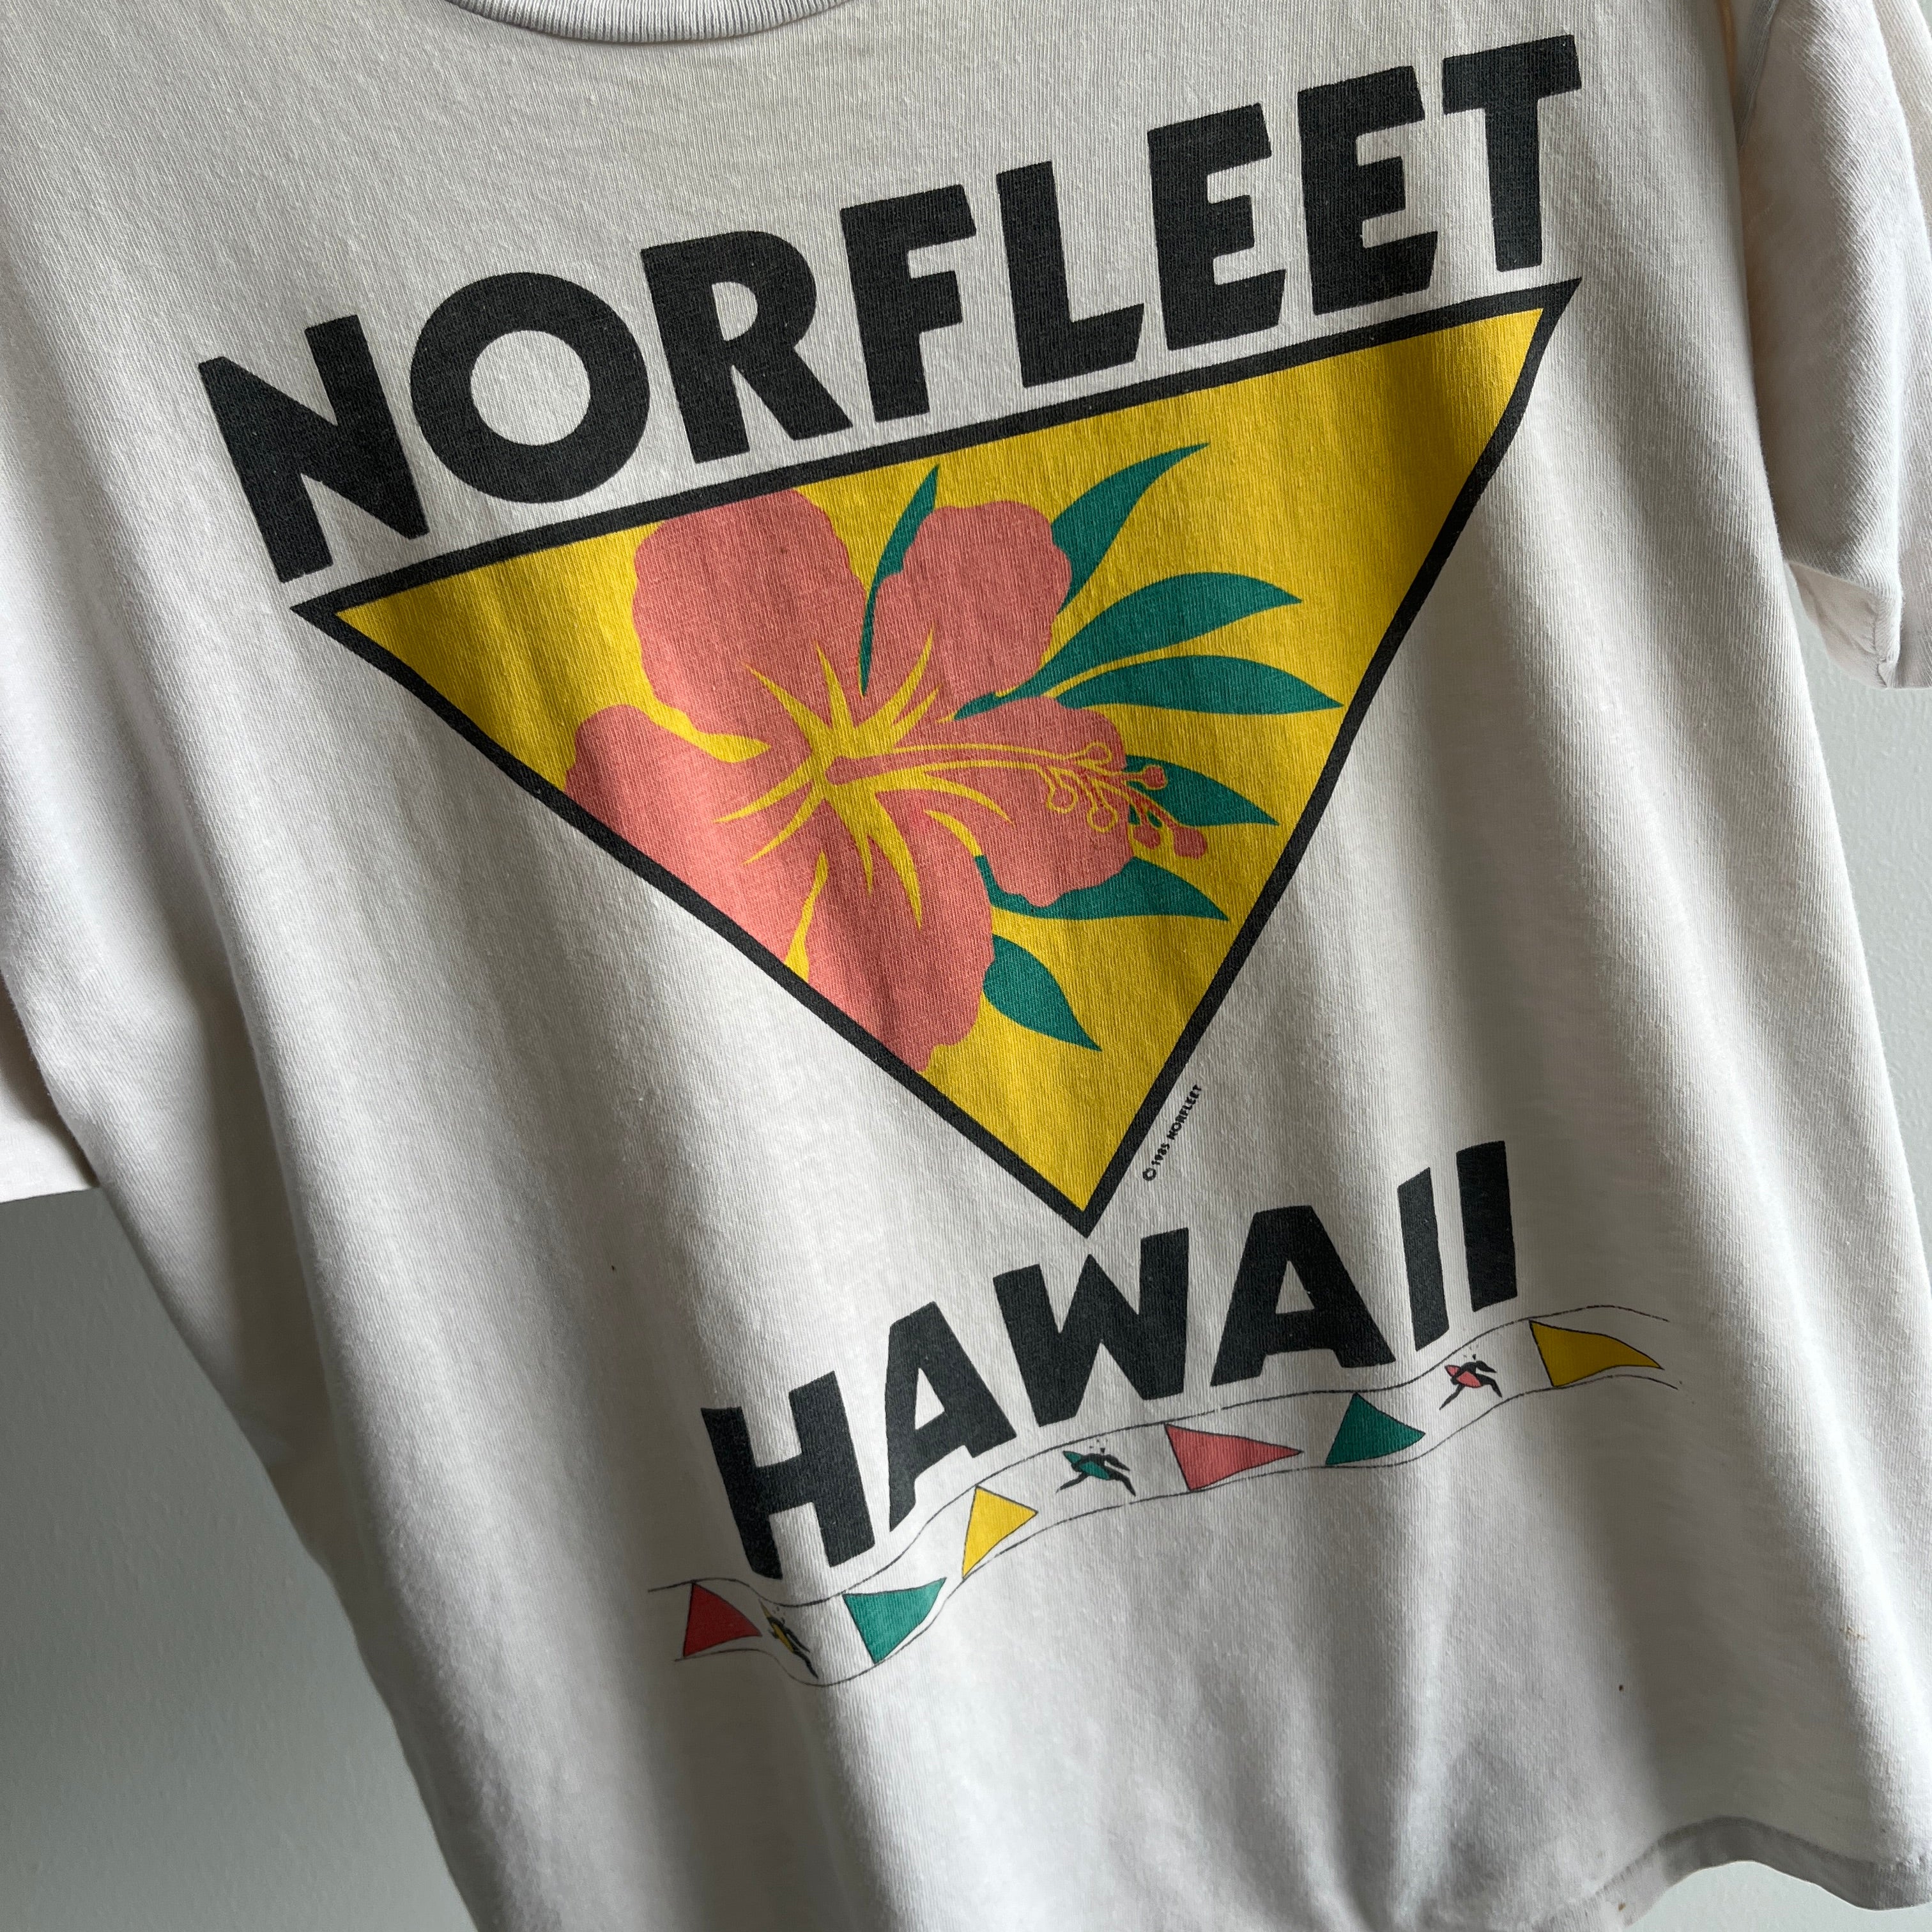 1985 Norfleet Hawaii Washed White T-Shirt - Worn to Perfection